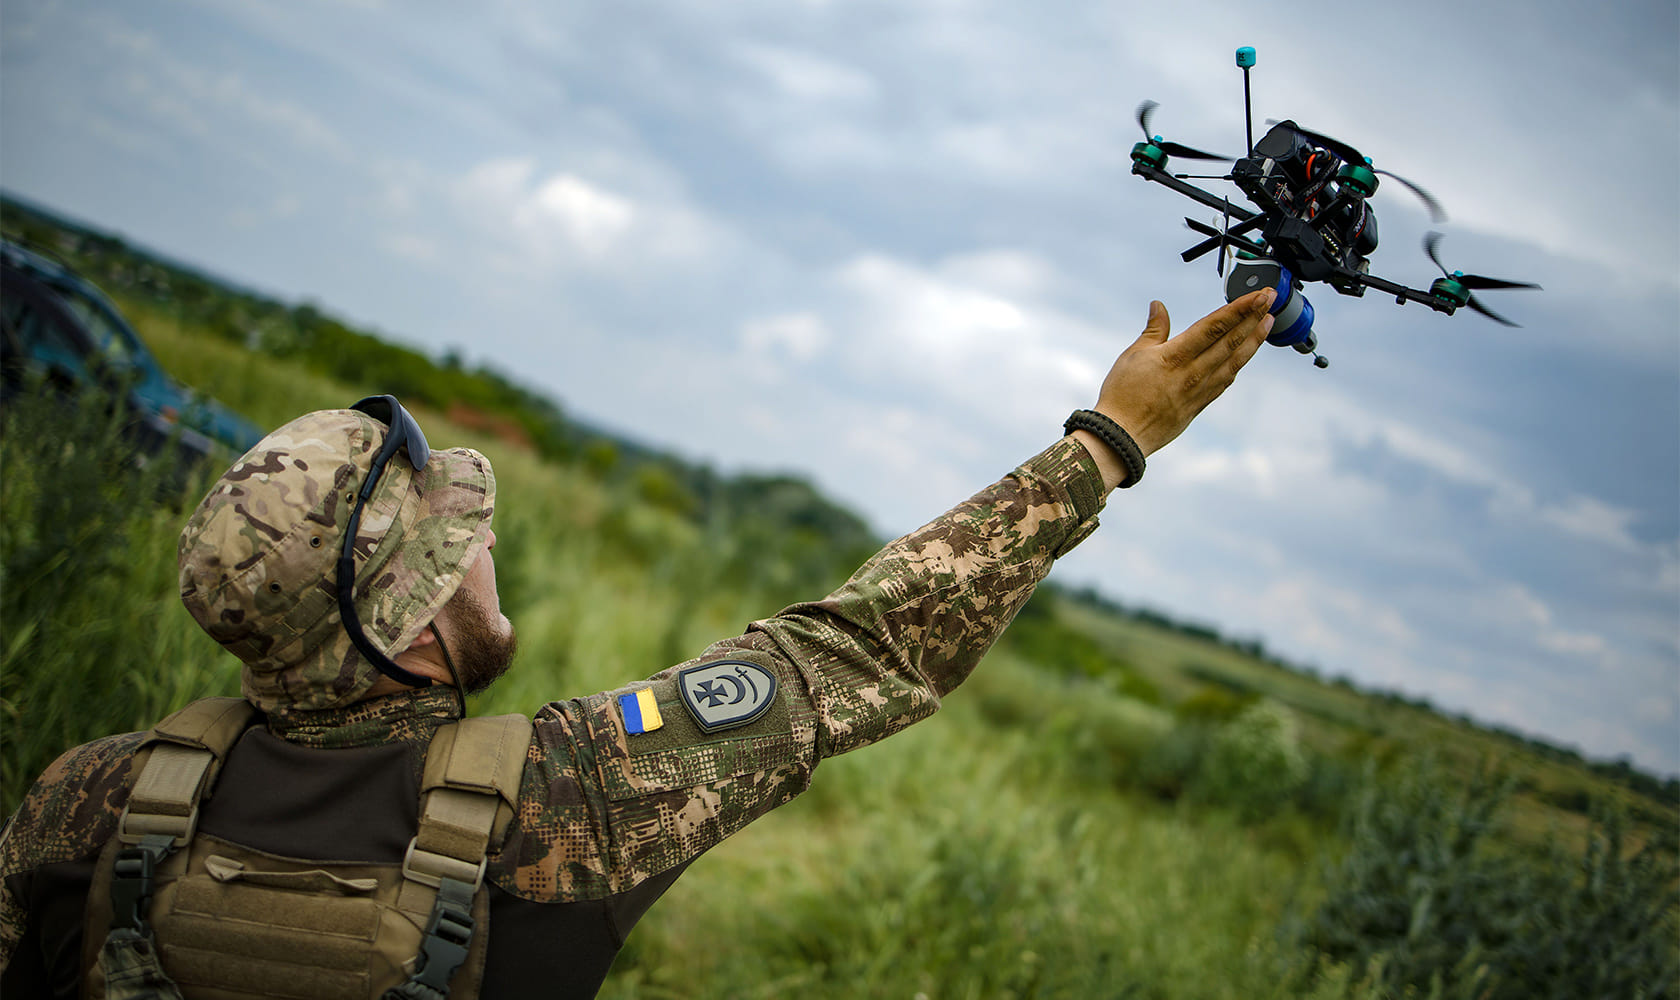 UK and other countries plan to provide Ukraine with thousands of drones with artificial intelligence